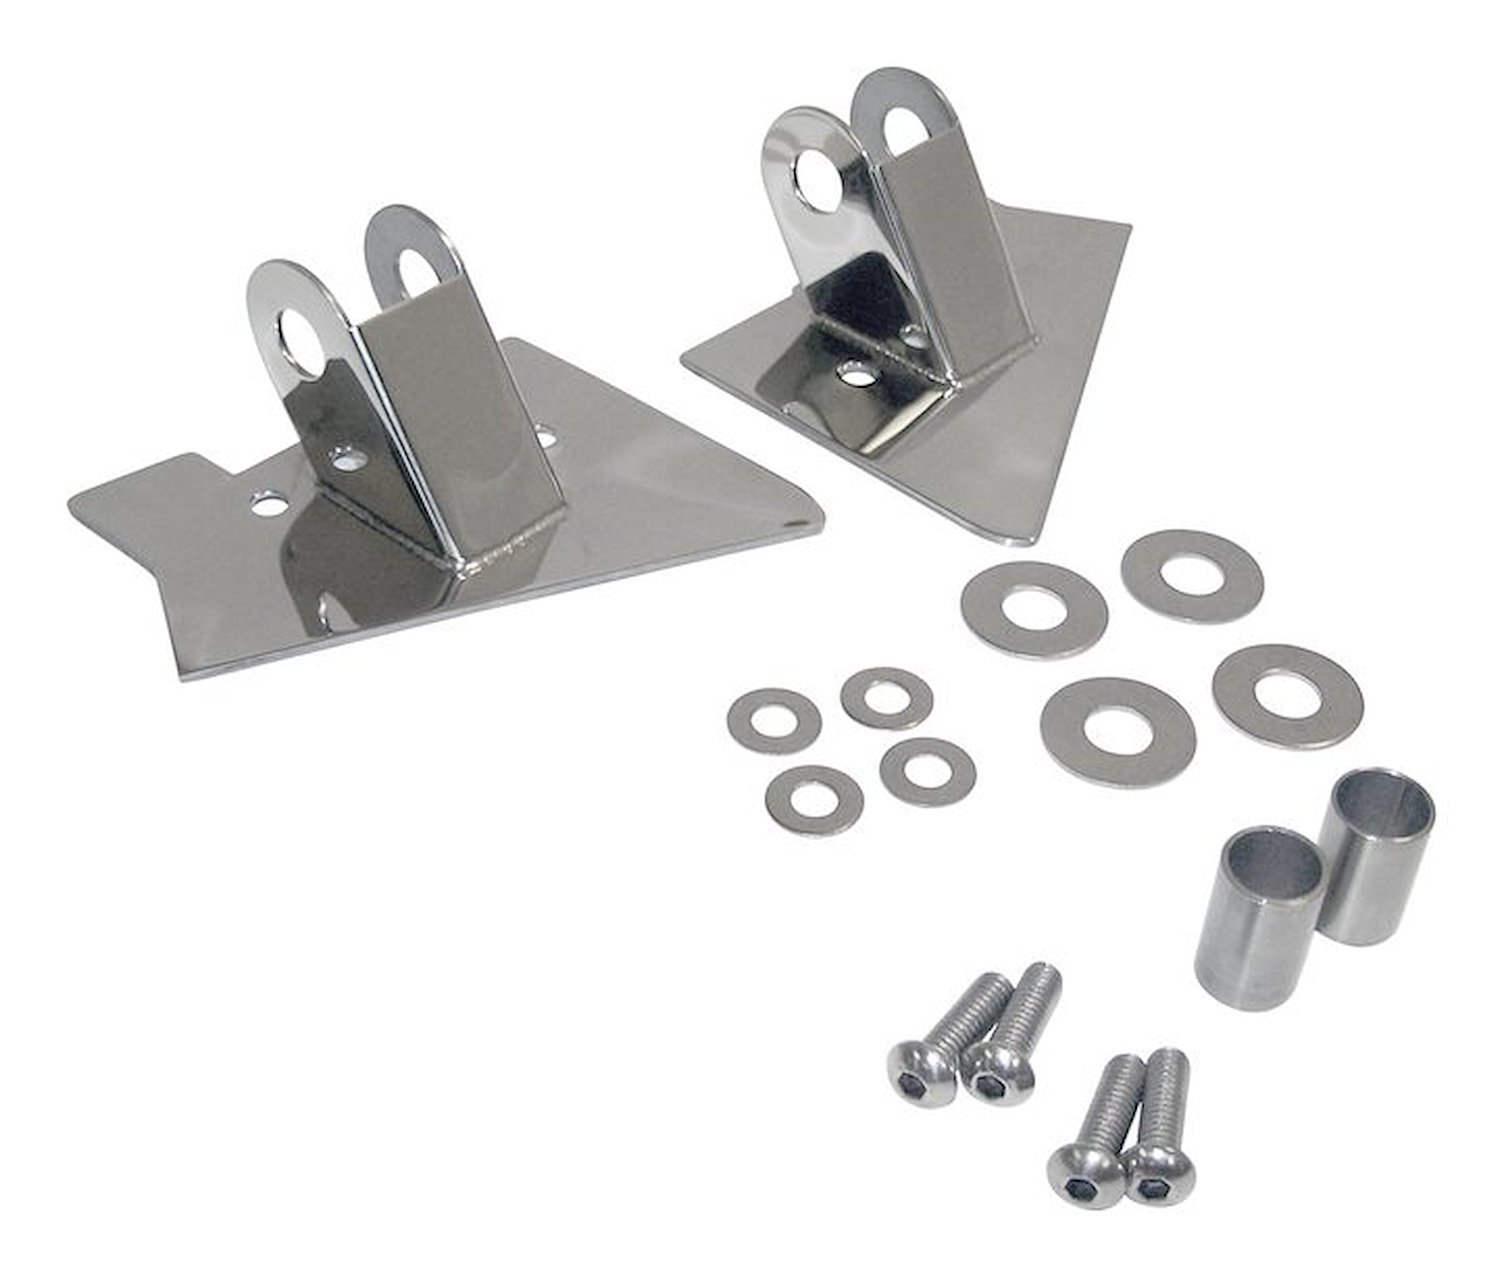 RT30015 Stainless Steel Mirror Relocation Brackets for 1997-2002 Jeep TJ Wrangler; Includes 2 Brackets, 2 Spacers, and 2 Washers